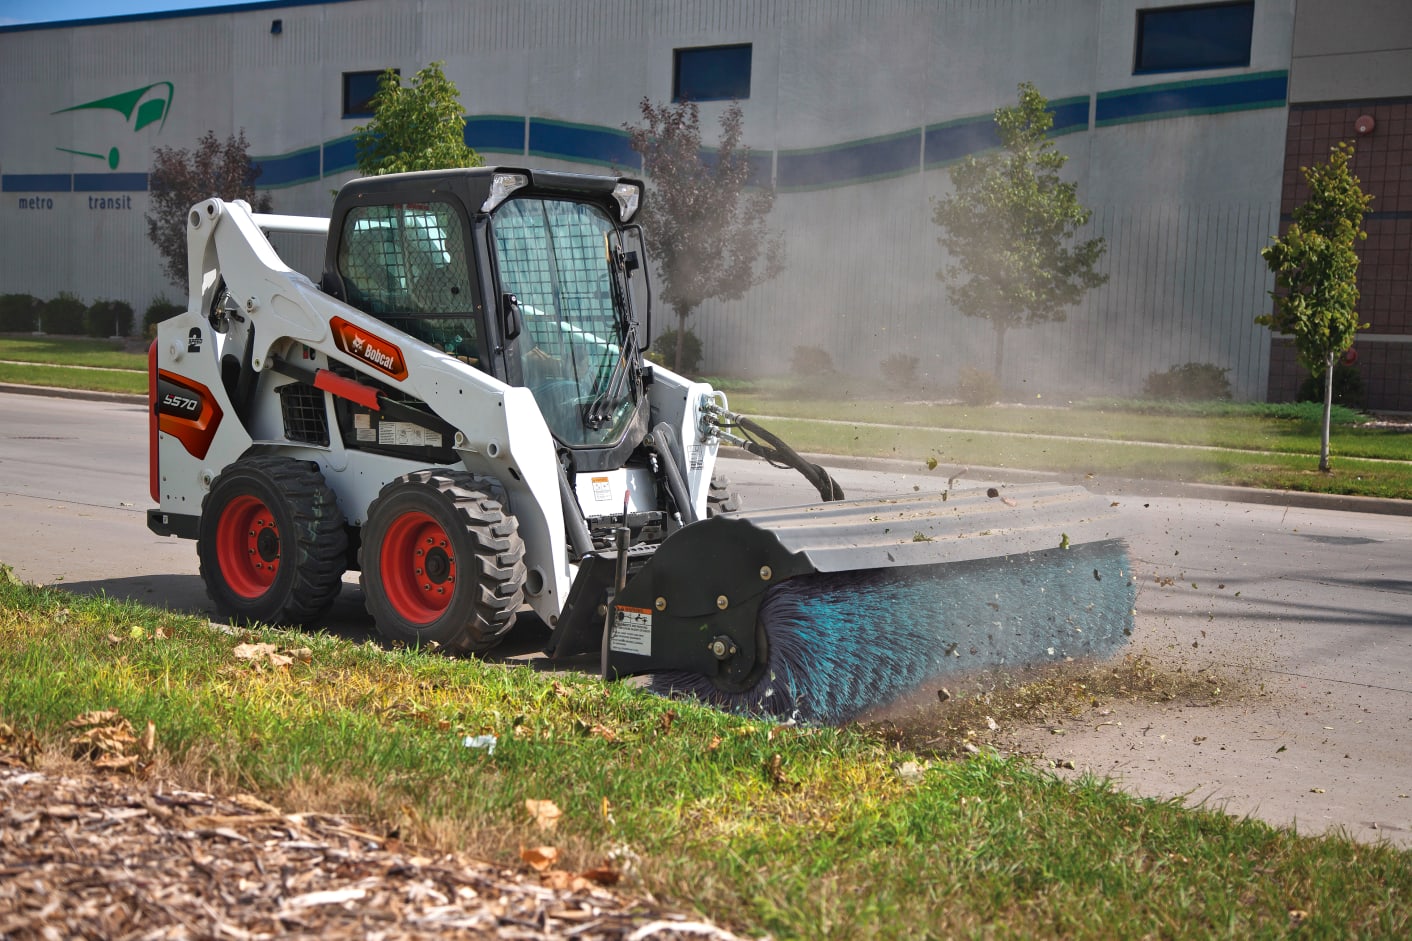 Browse Specs and more for the S570 Skid-Steer Loader - Bobcat of Indy